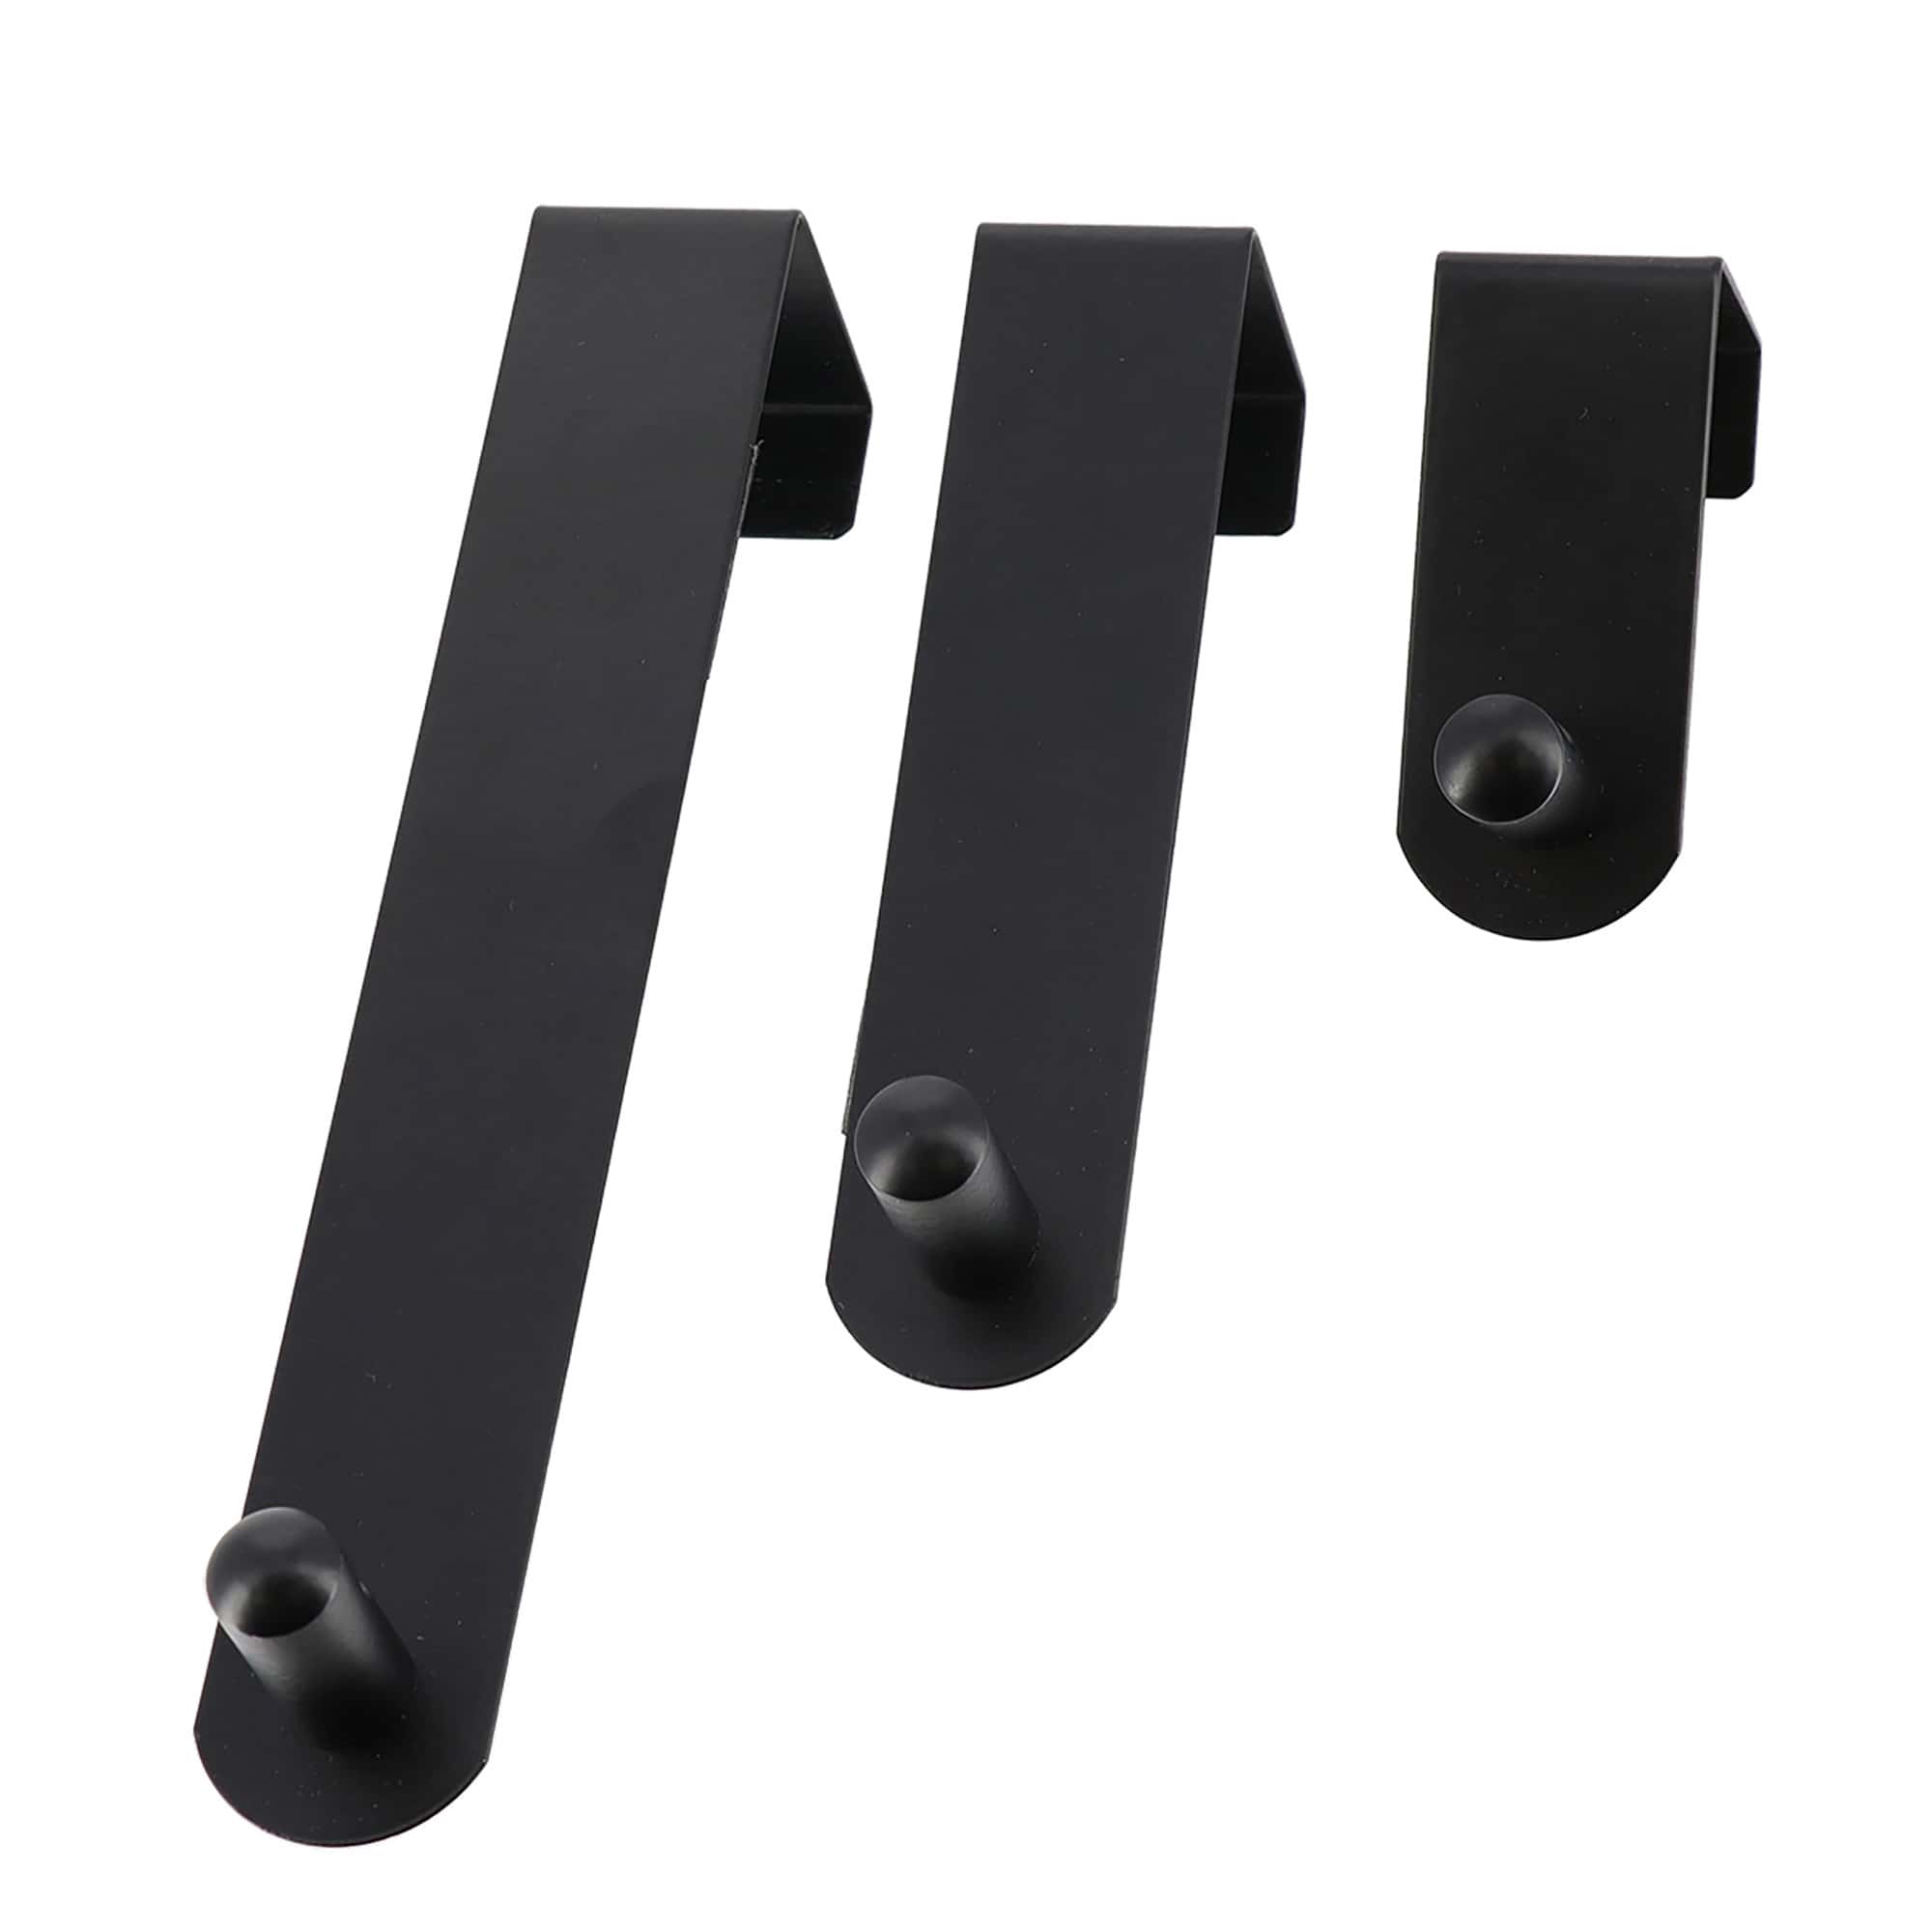 Modern Black Over-the-Door Hook Set: A Selection of Three Matte Black Hooks of Graduated Sizes, Designed for Sleek Functionality, Isolated on a White Background.